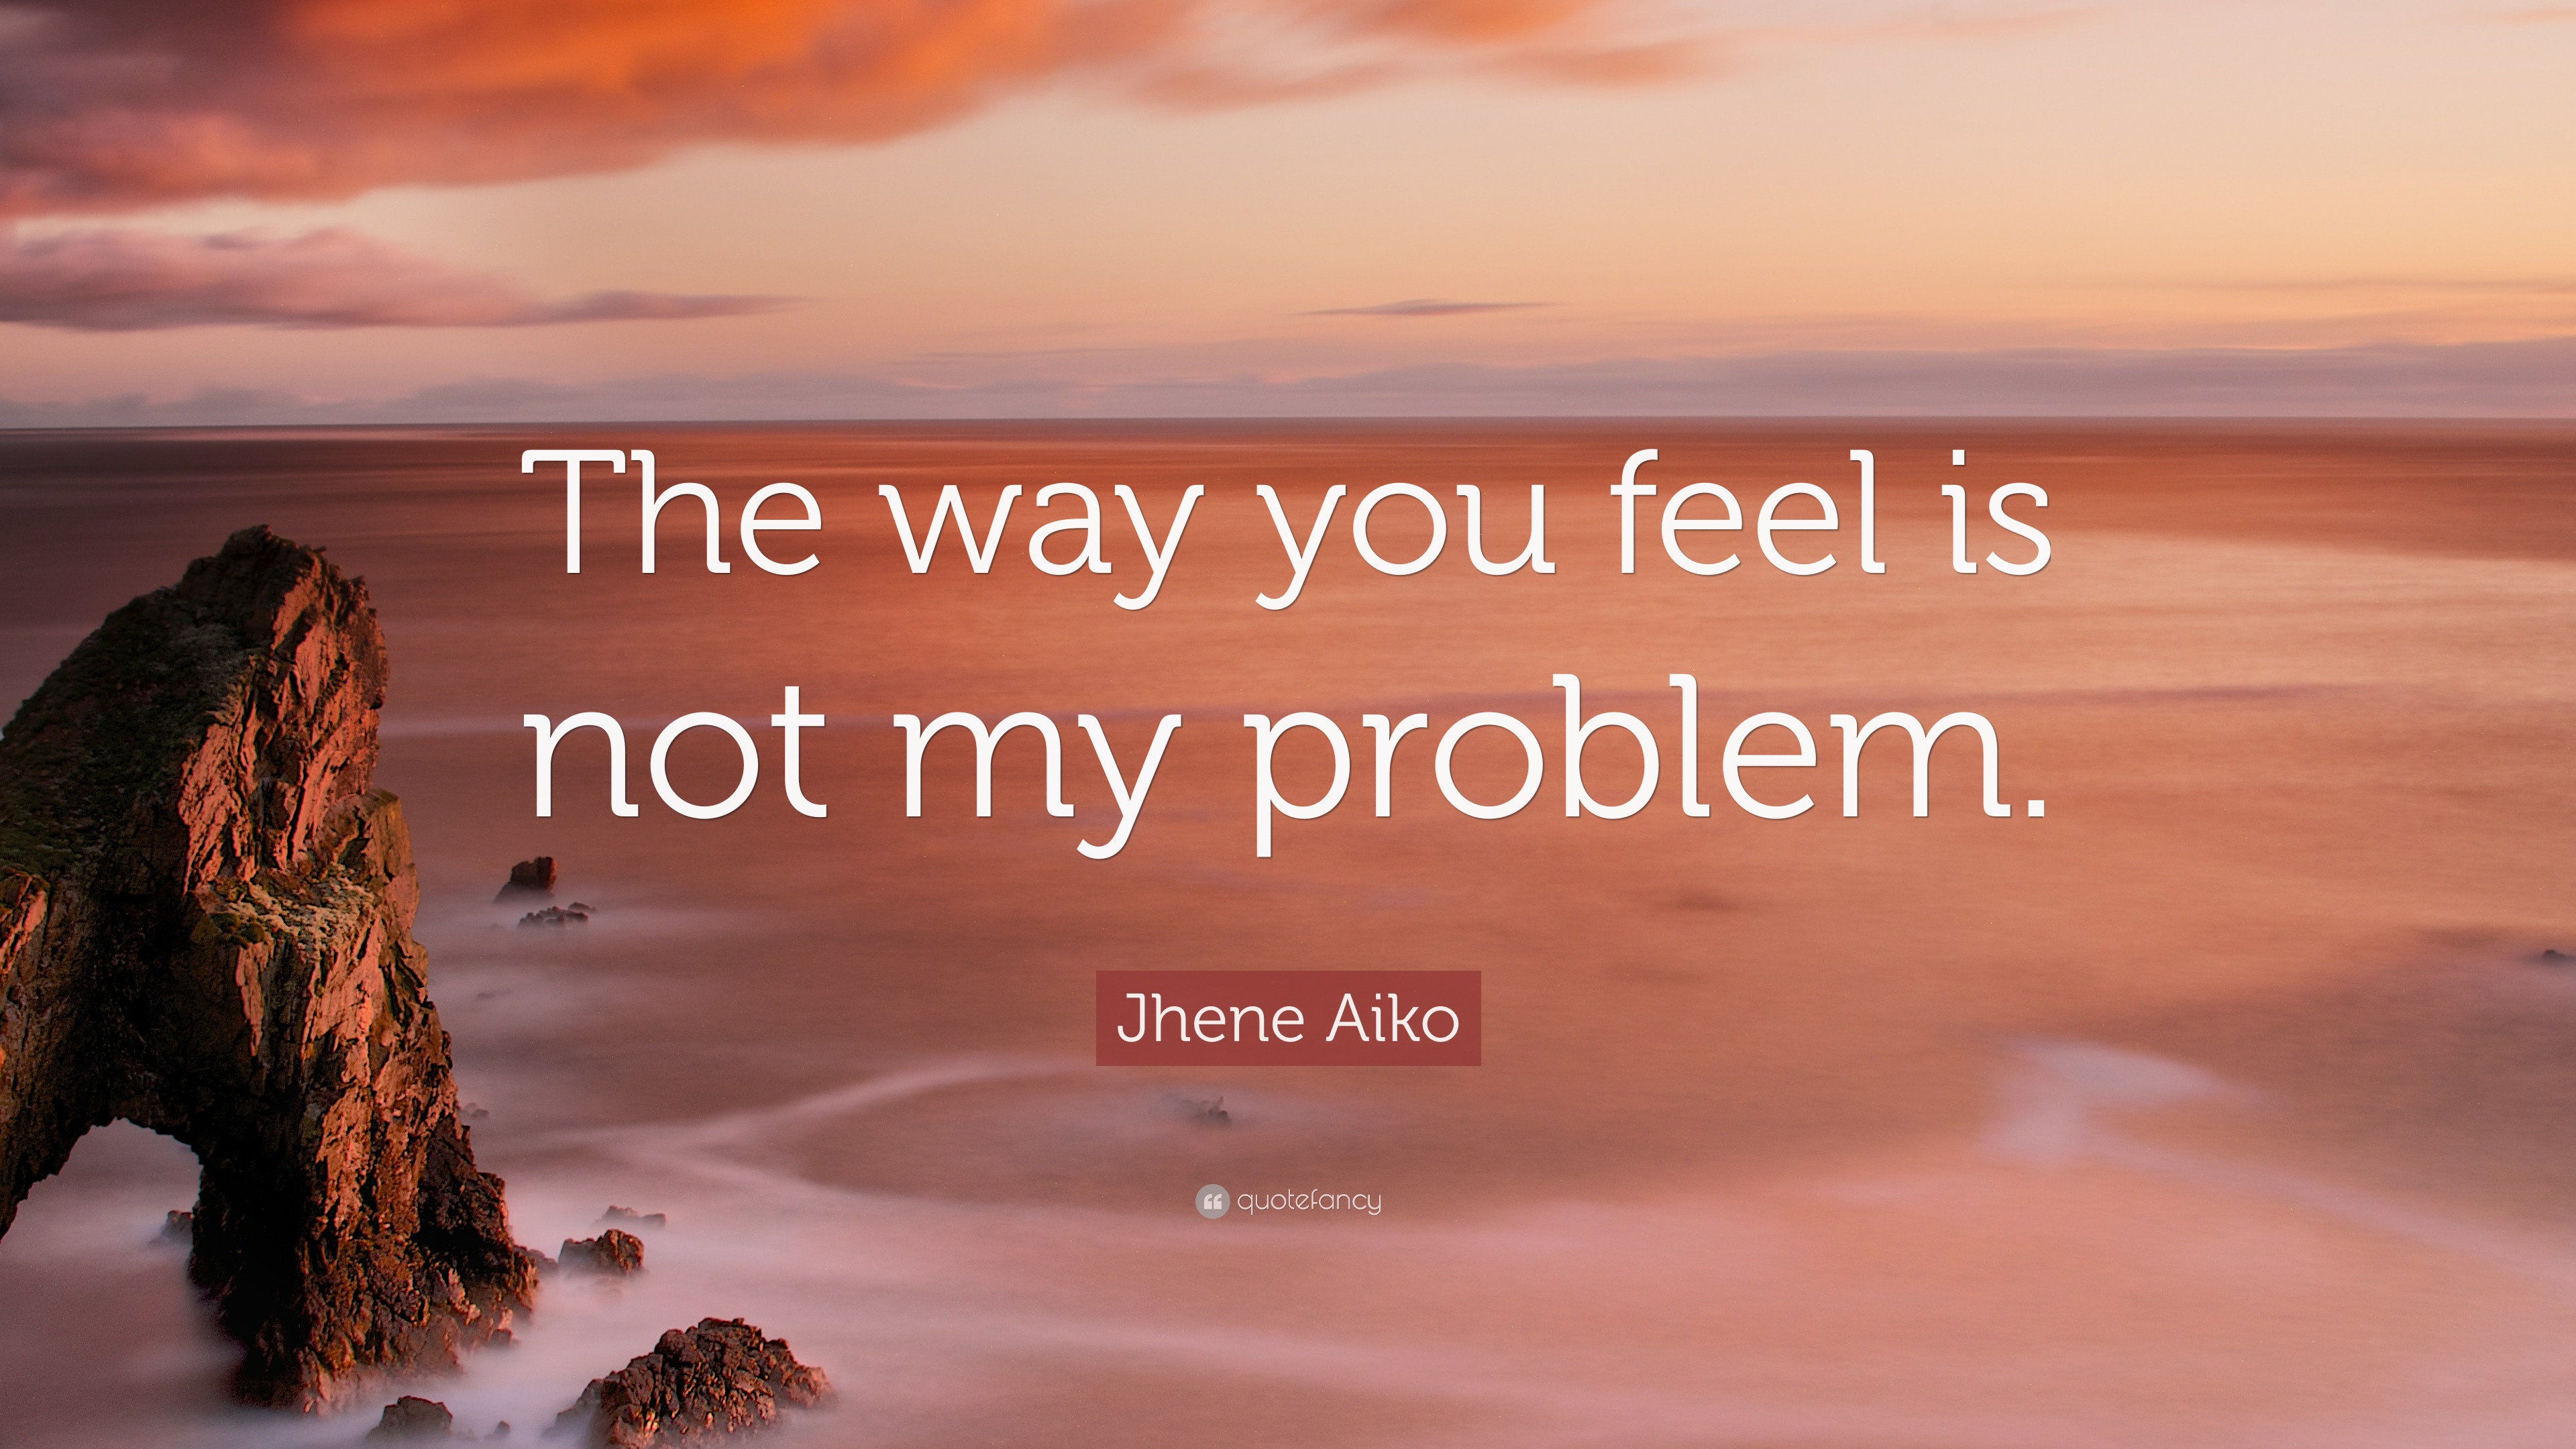 Jhene Aiko Quote “The way you feel is not my problem.”